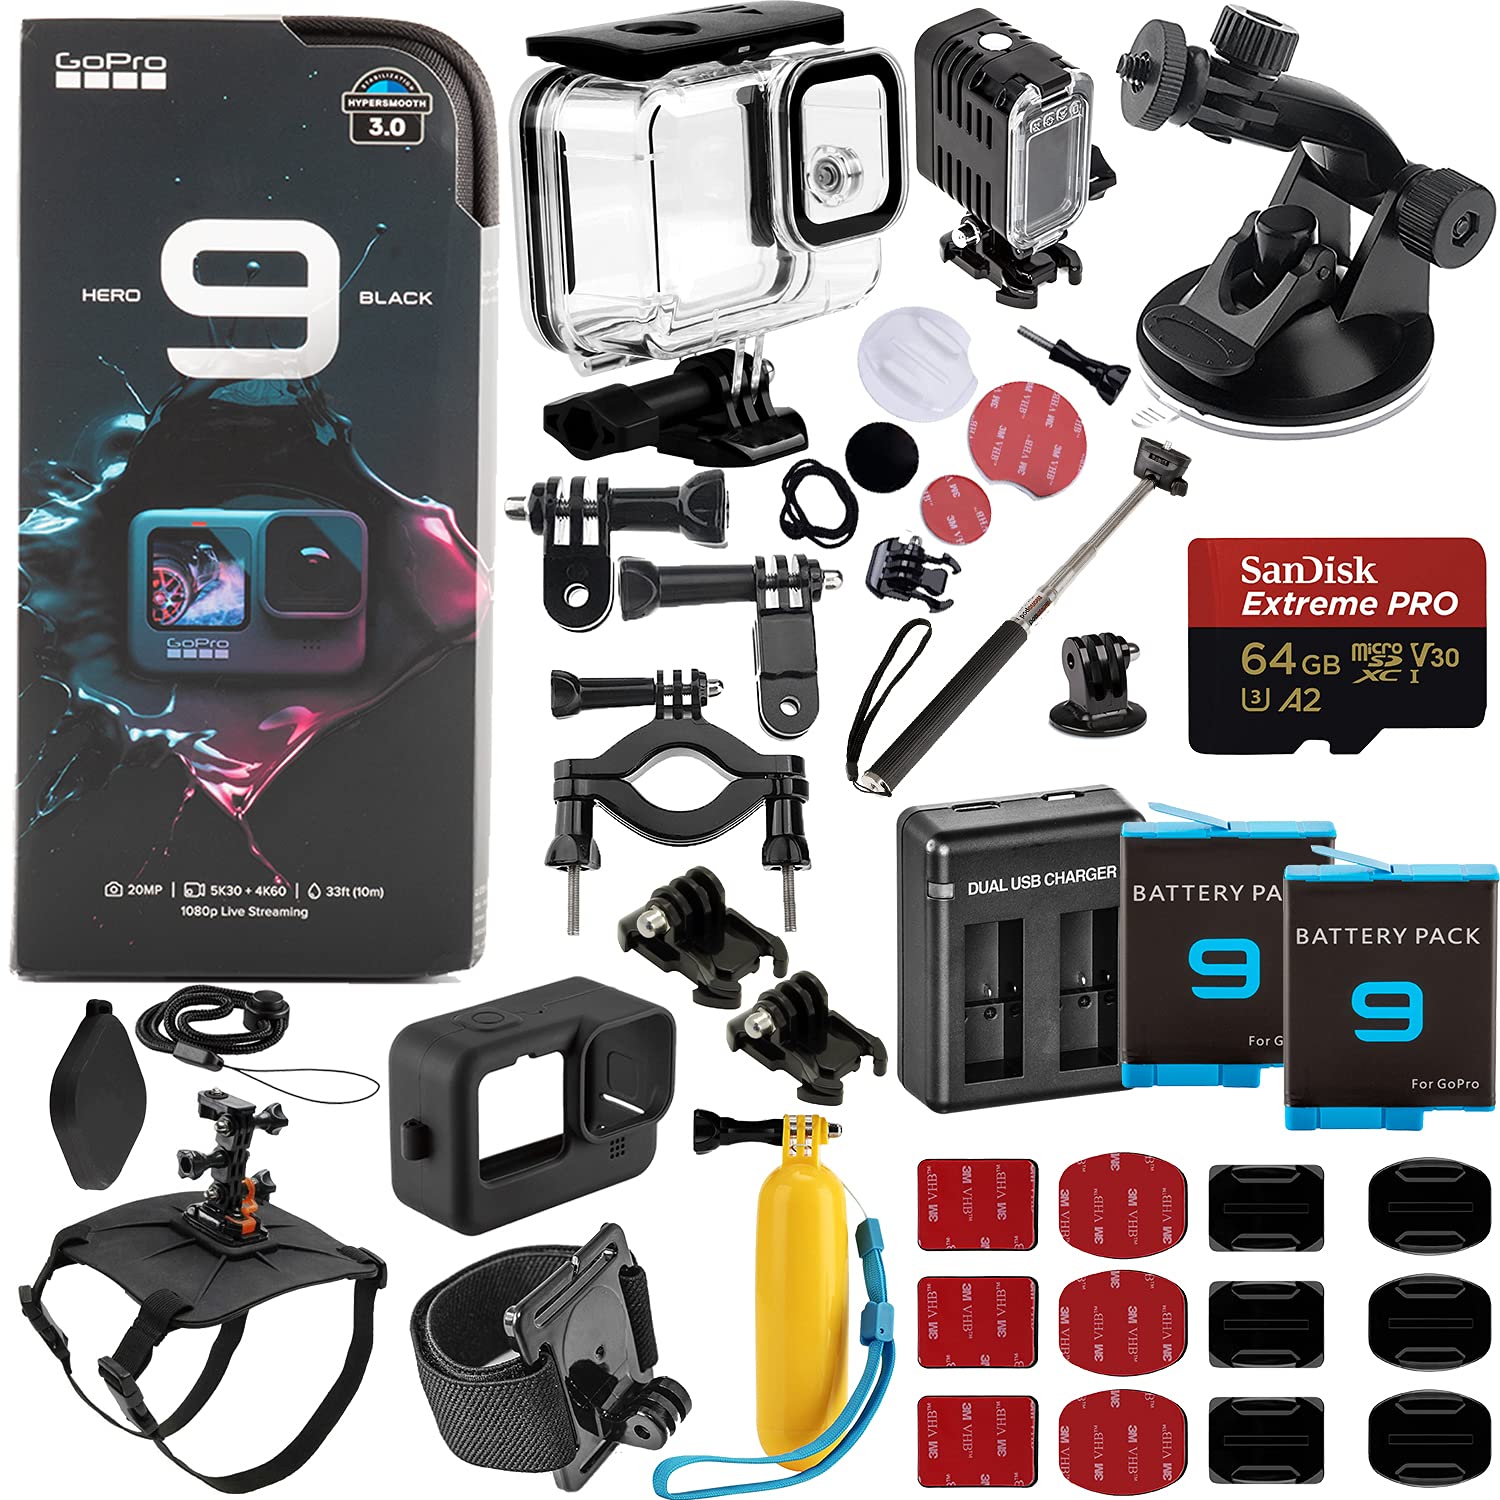 GoPro HERO9 (Hero 9) Black with Deluxe Outdoor Bundle - Includes: SanDisk Extreme PRO 64GB miniSDXC, 2X Replacement Batteries, Action Camera Mount Harness for Pets, Underwater Housing & So Much More